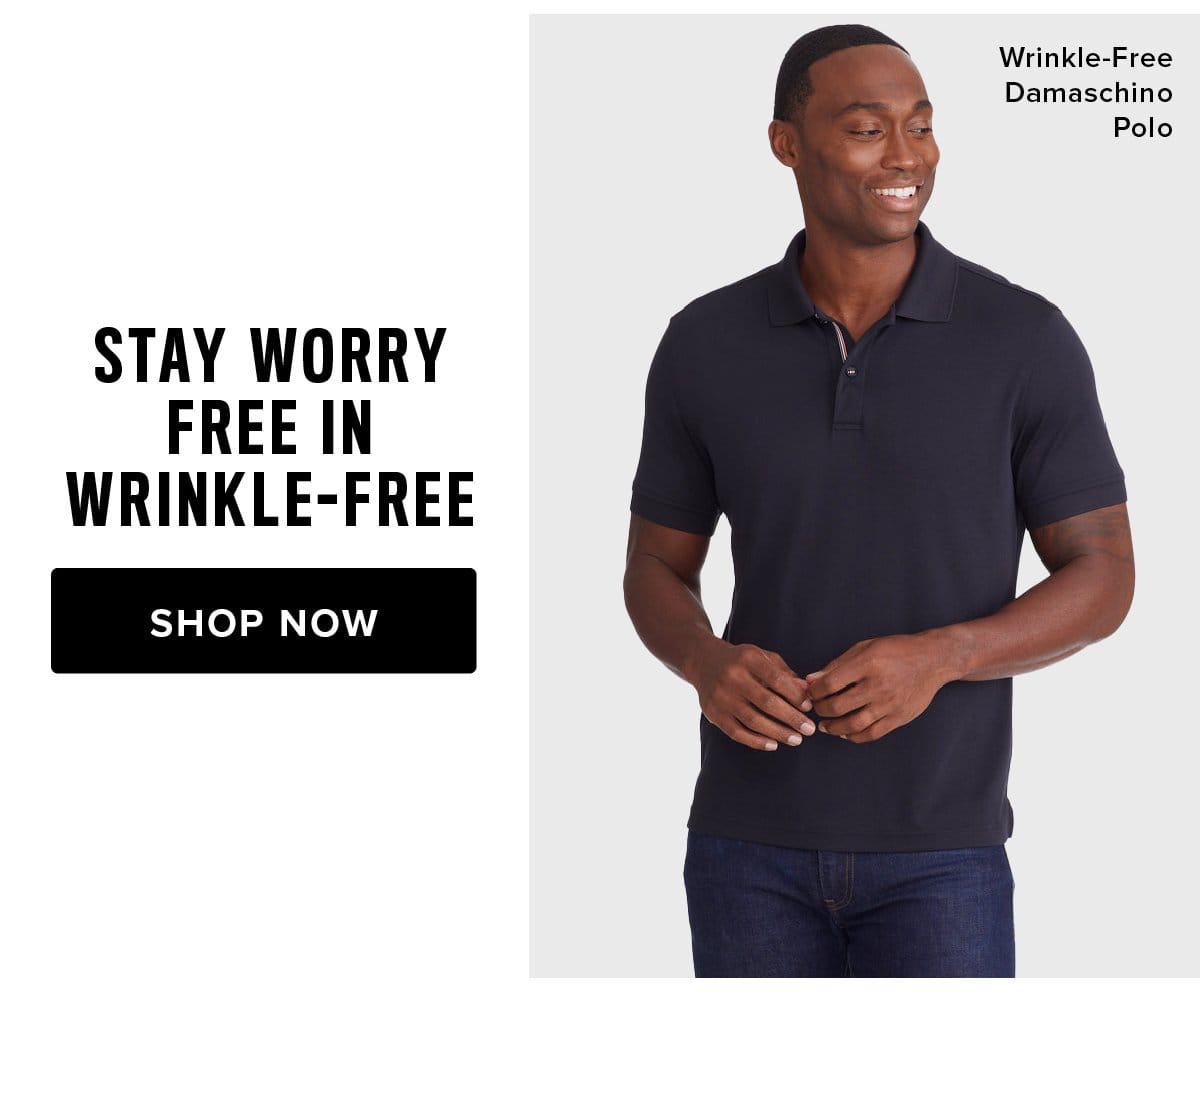 Stay Worry Free in Wrinkle-Free